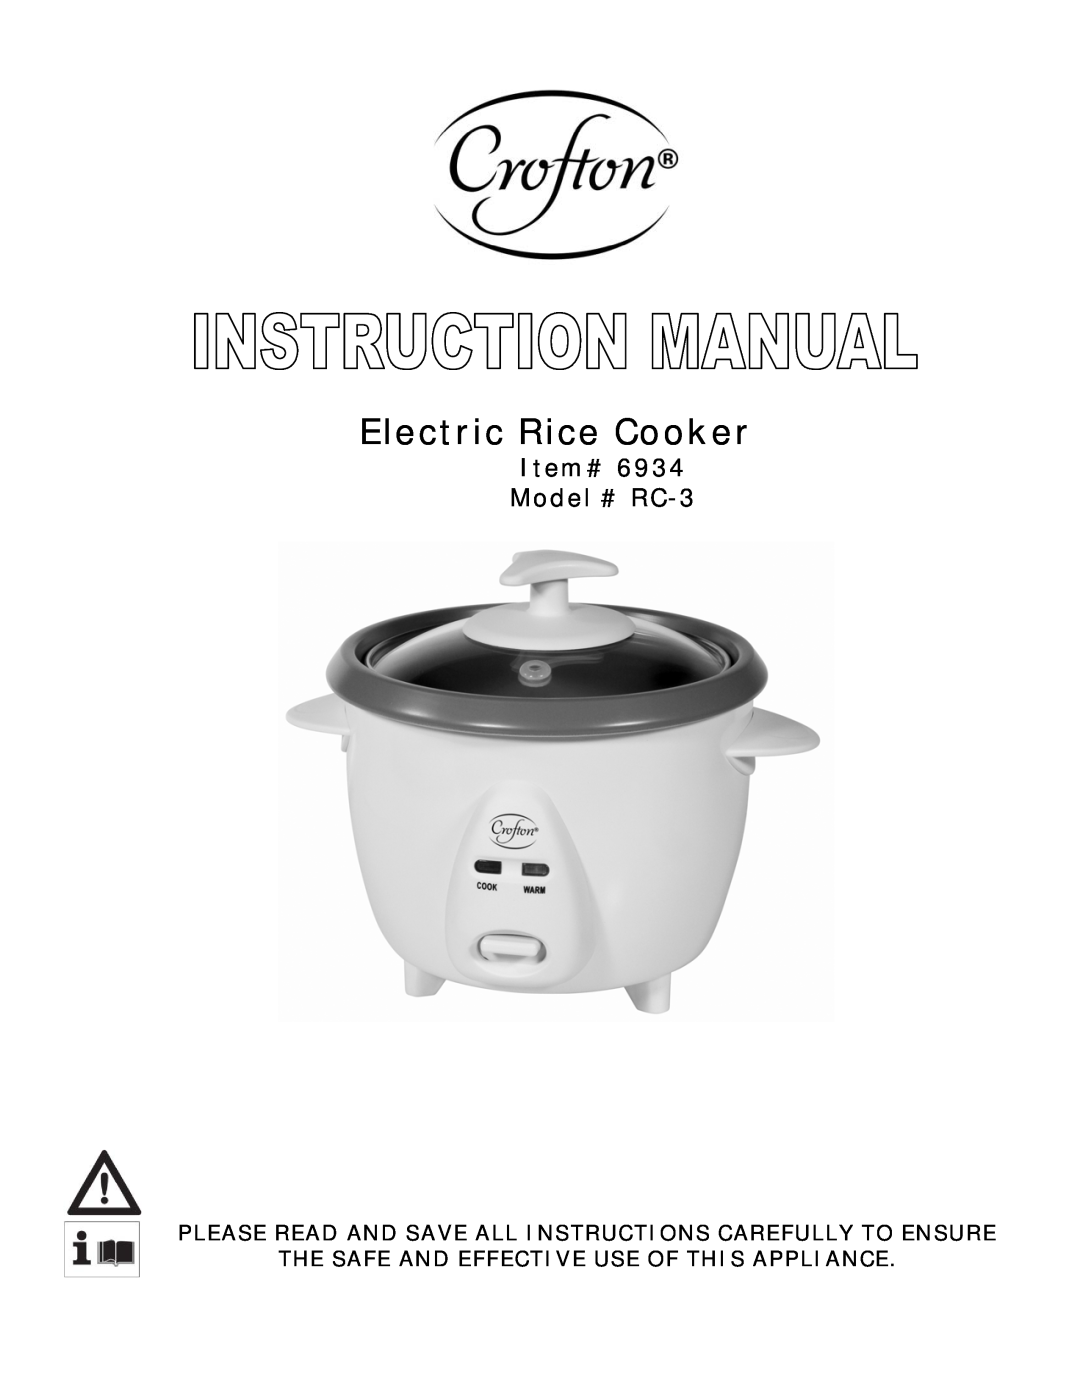 Wachsmuth & Krogmann manual Electric Rice Cooker, Item# Model # RC-3, The Safe And Effective Use Of This Appliance 